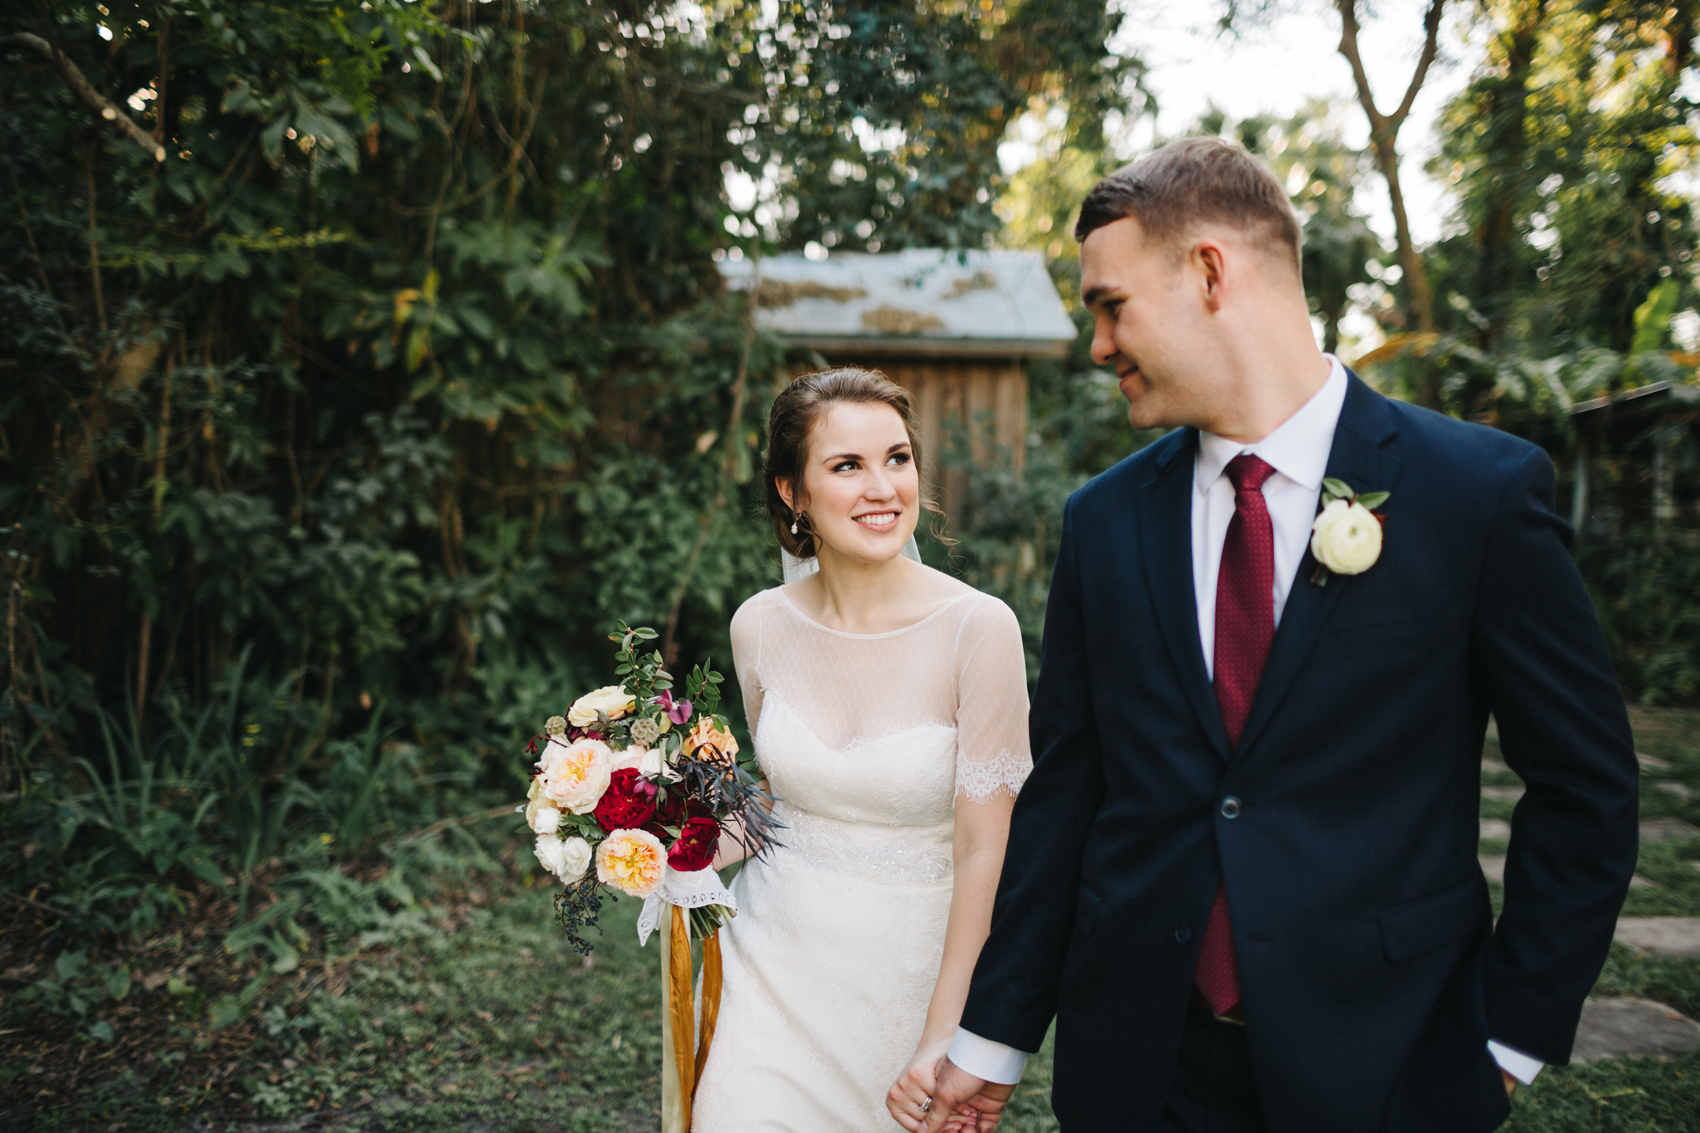 bride smiling at her groom carrying a lush burgundy, peach, and gold wedding bouquet